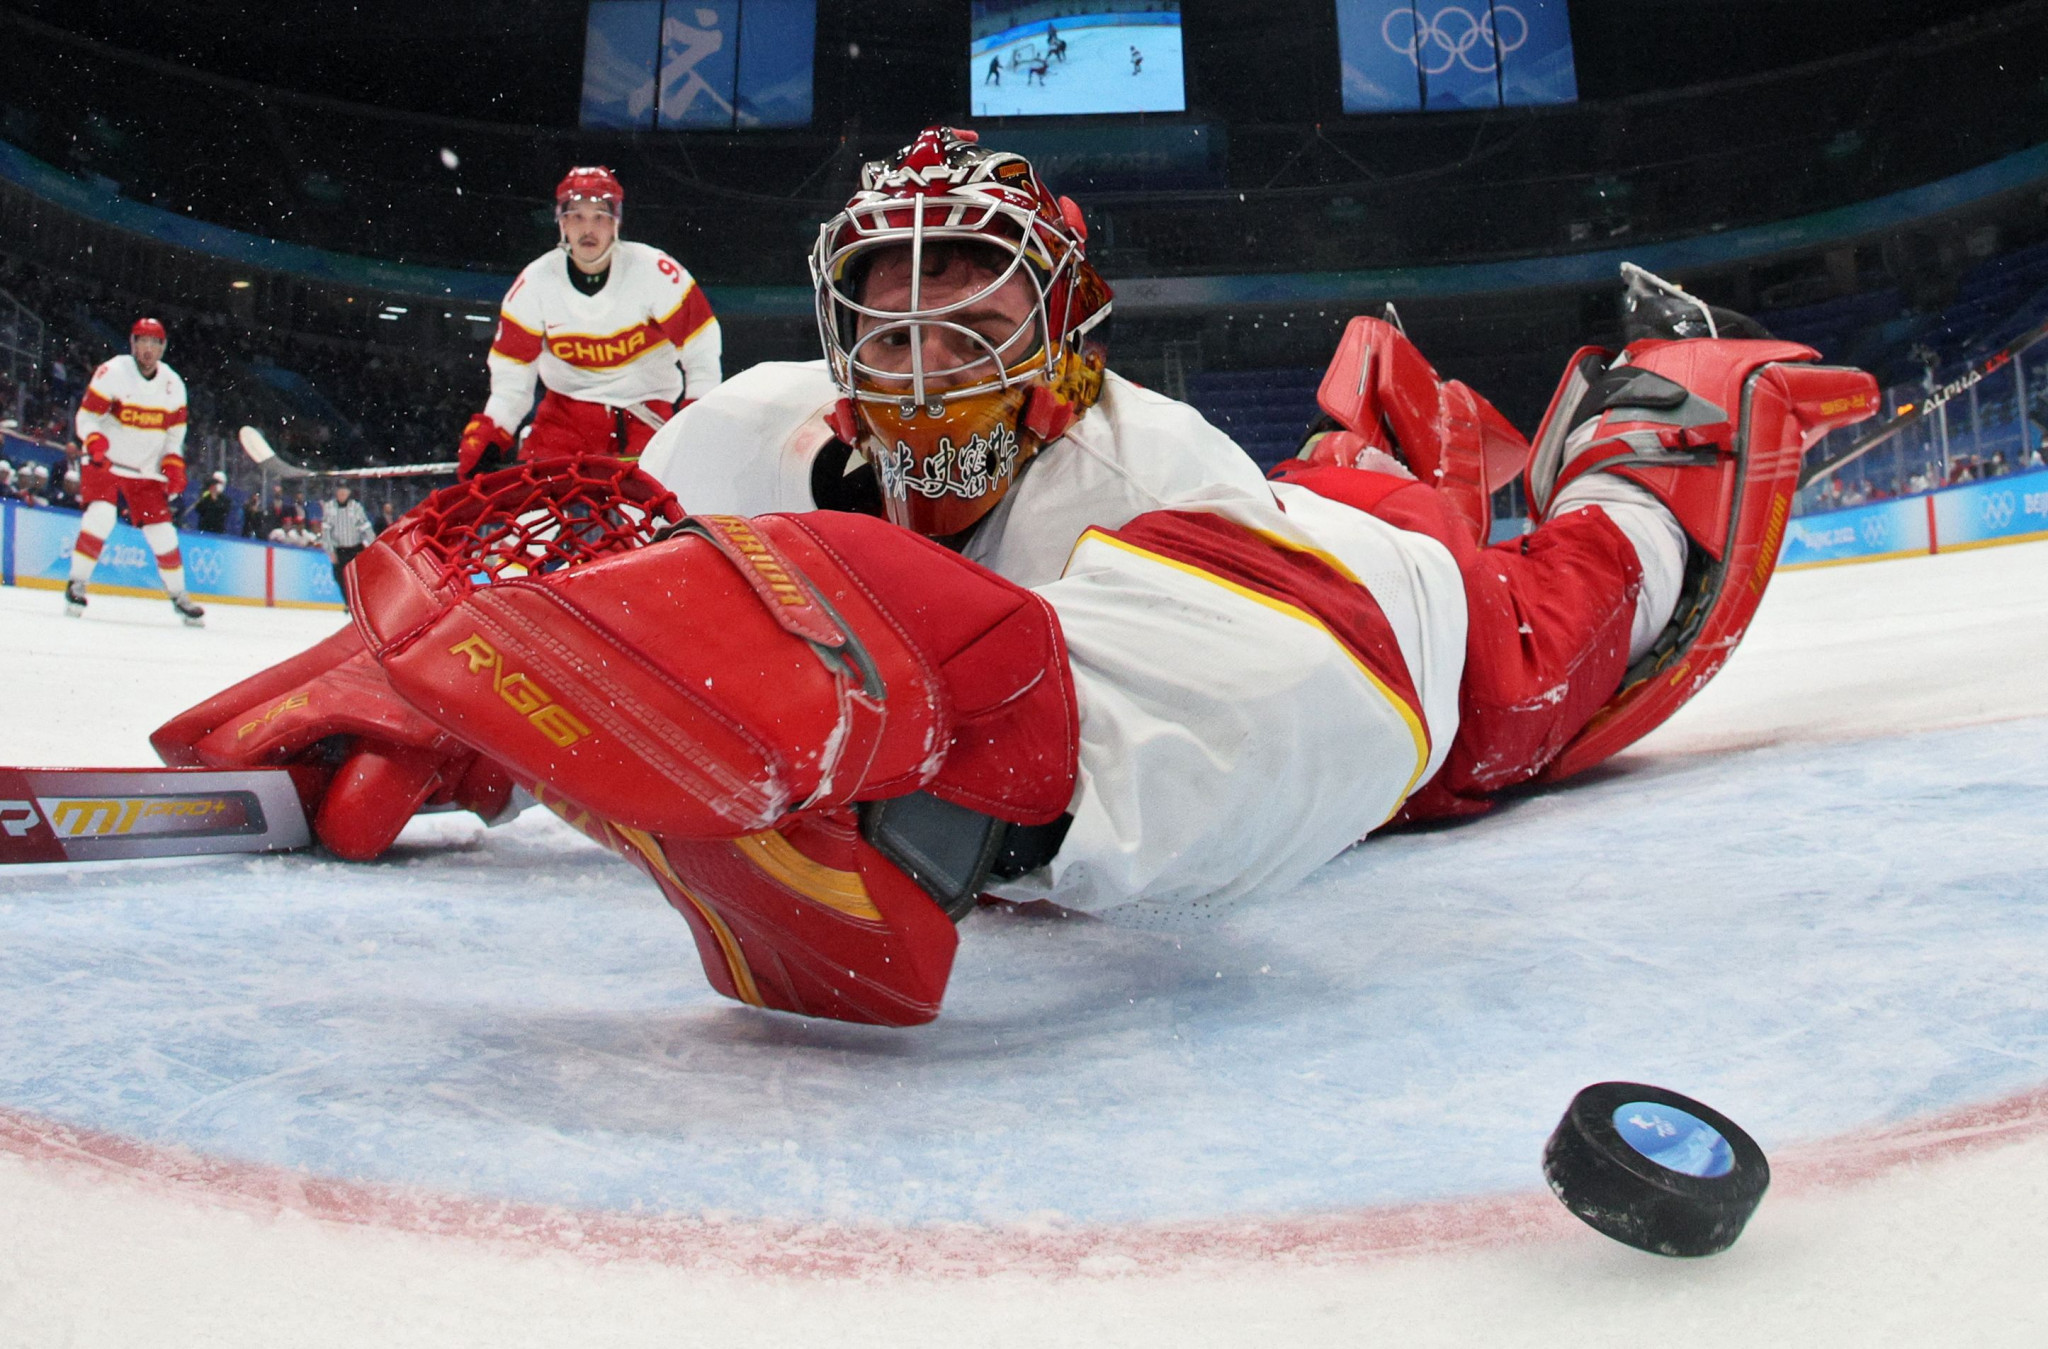 China suffered an 8-0 loss to the United States a Beijing 2022 in their first Olympic ice hockey match ©Getty Images